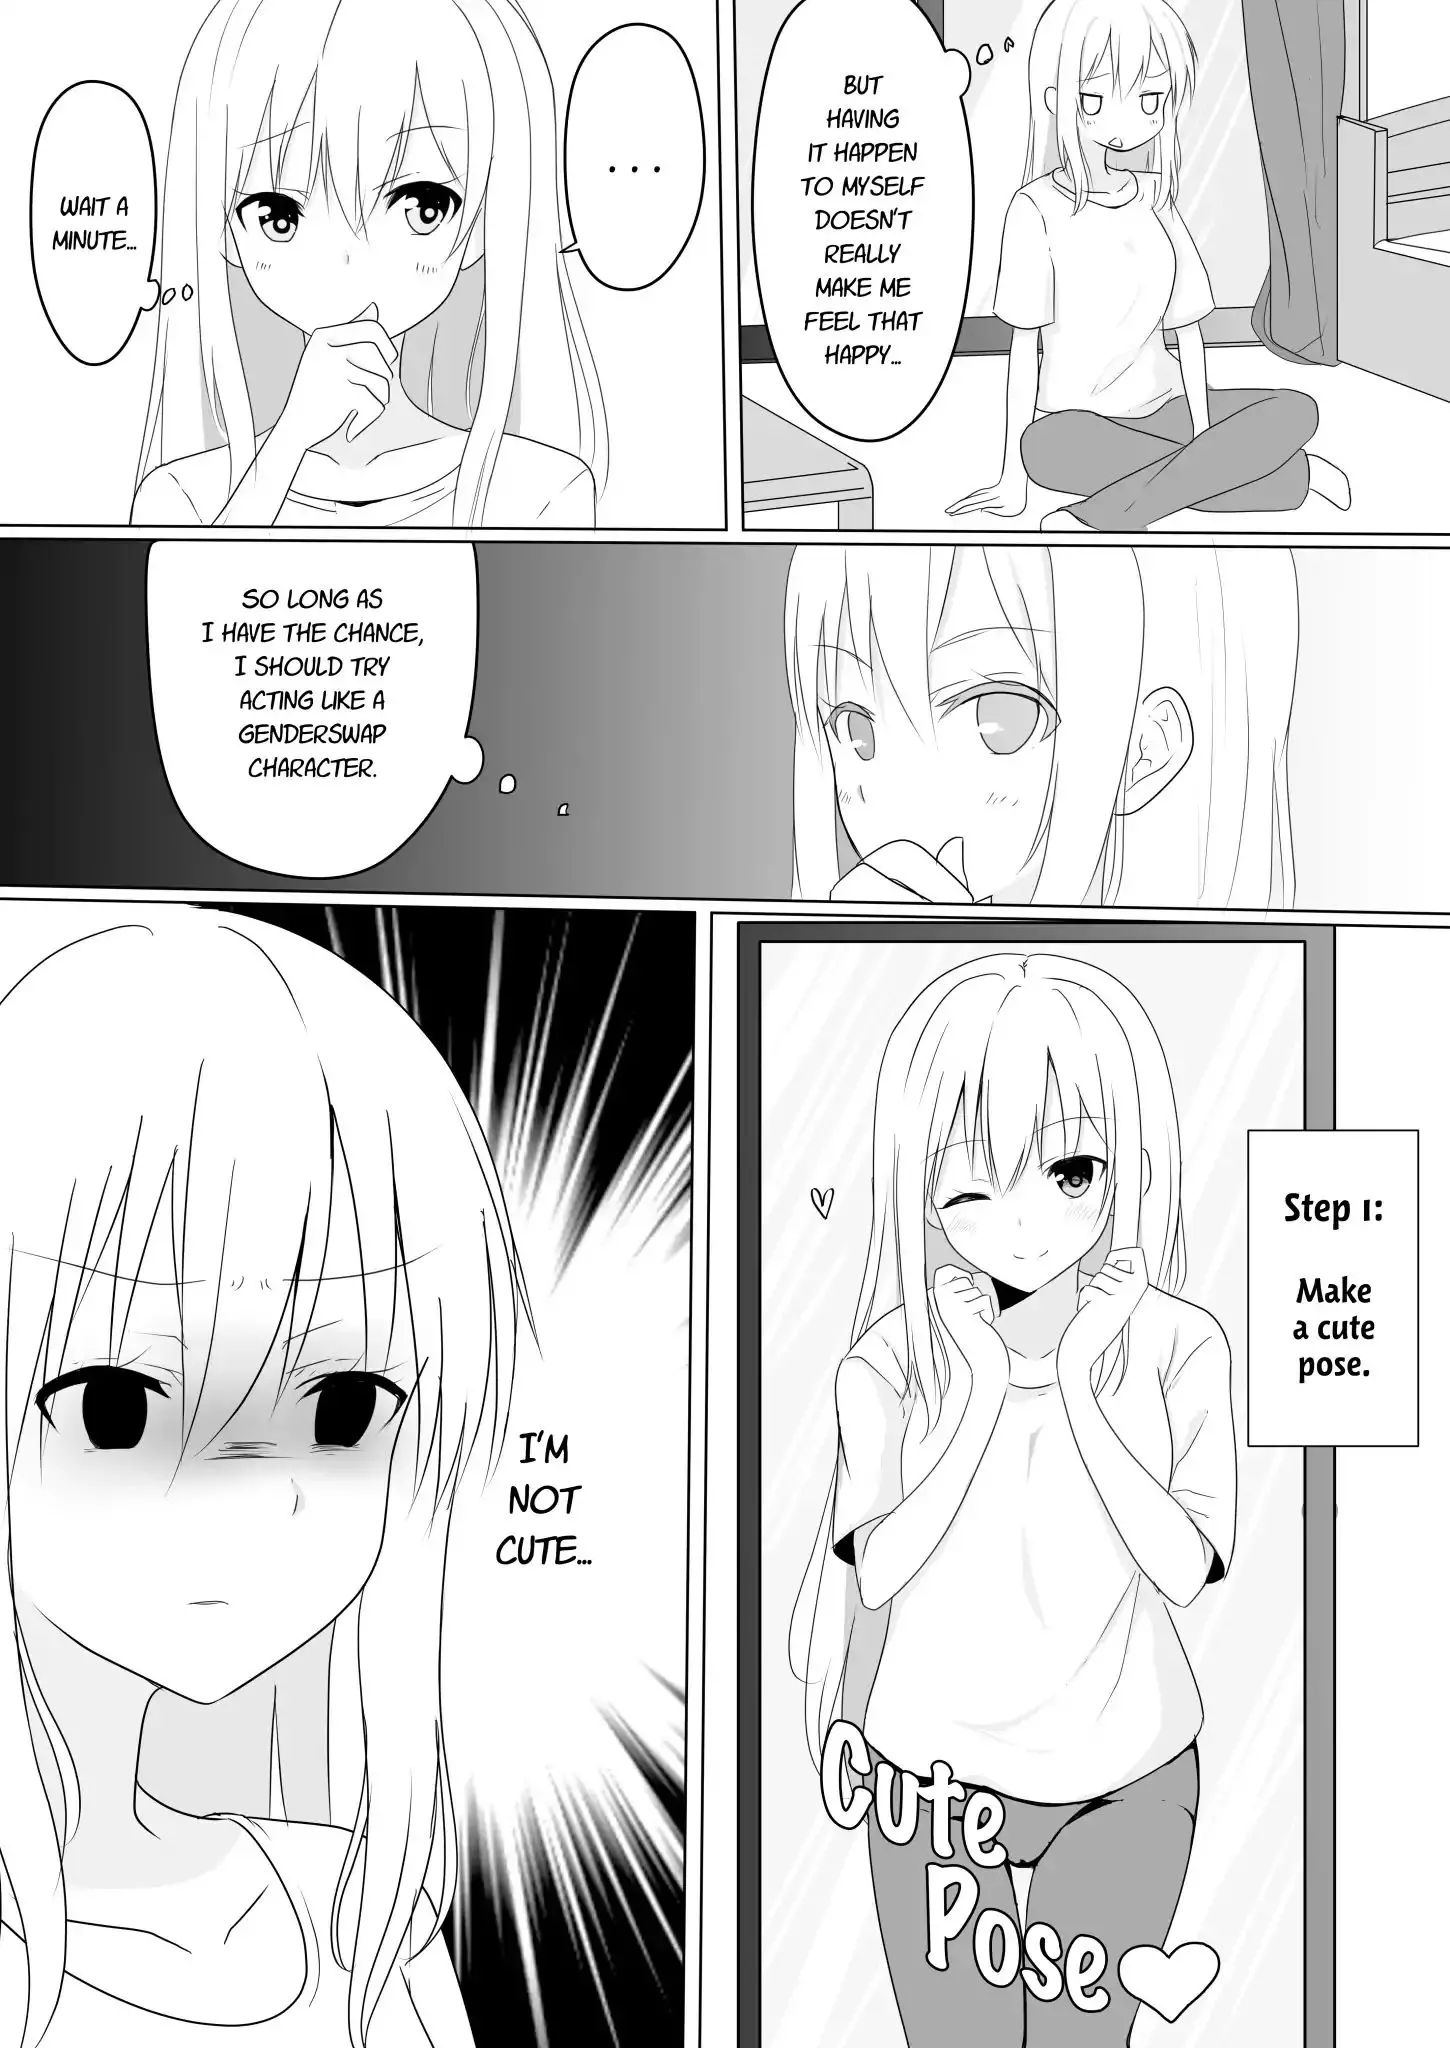 A Boy Who Loves Genderswap Got Genderswapped So He Acts Out His Ideal Genderswap Girl - 1 page 3